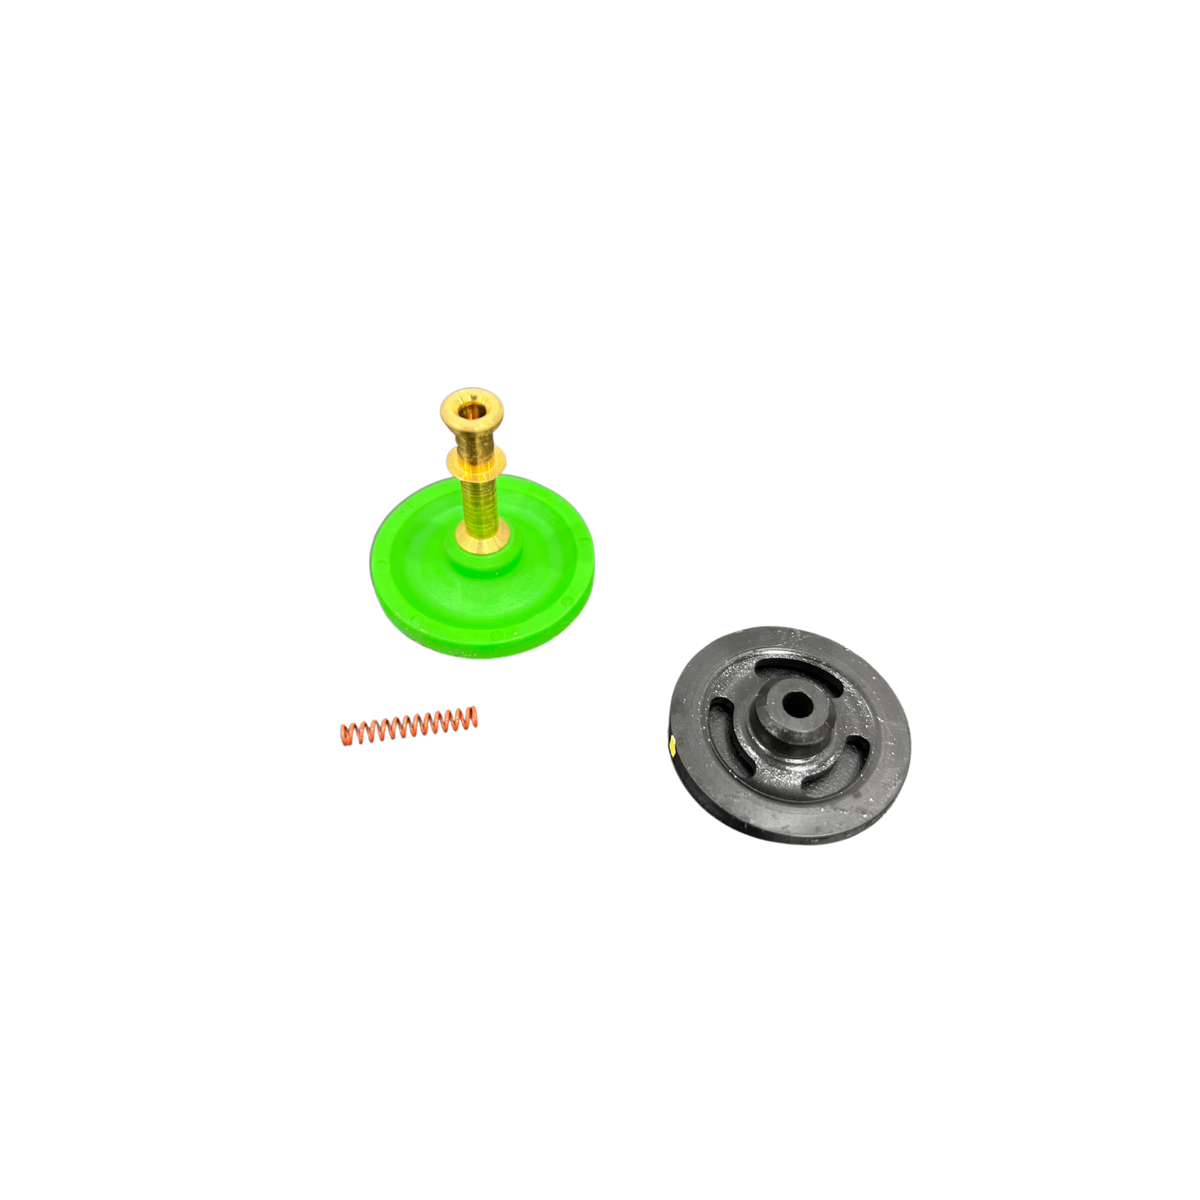 lime green rubber base with metal  stem, black rubber washer and small spring. 